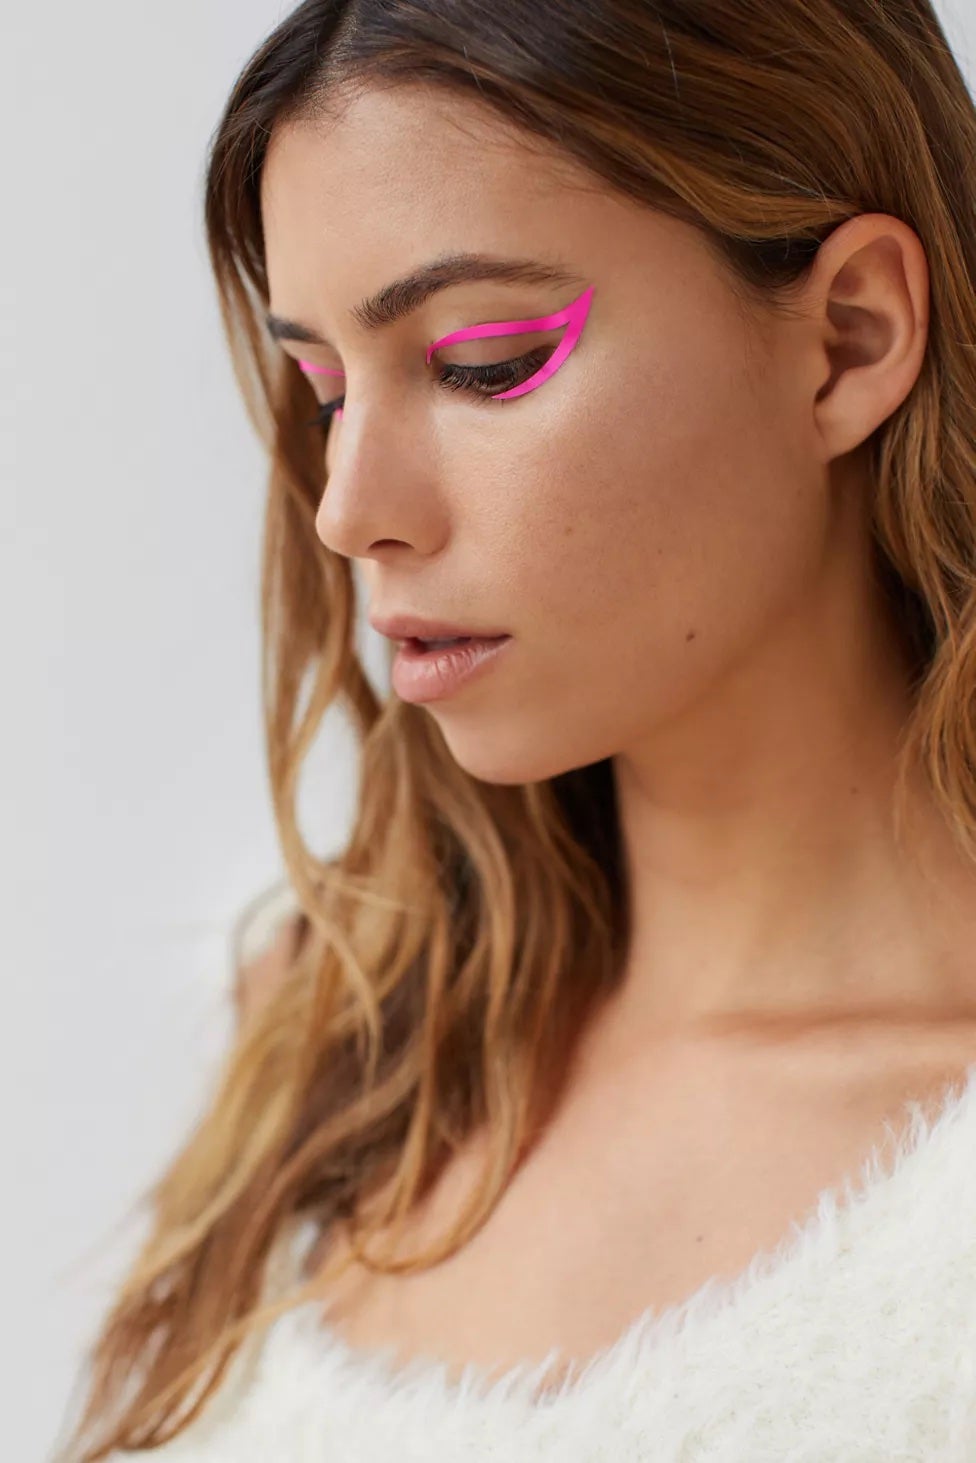 model wearing hot pink exaggerated cat eye sticker